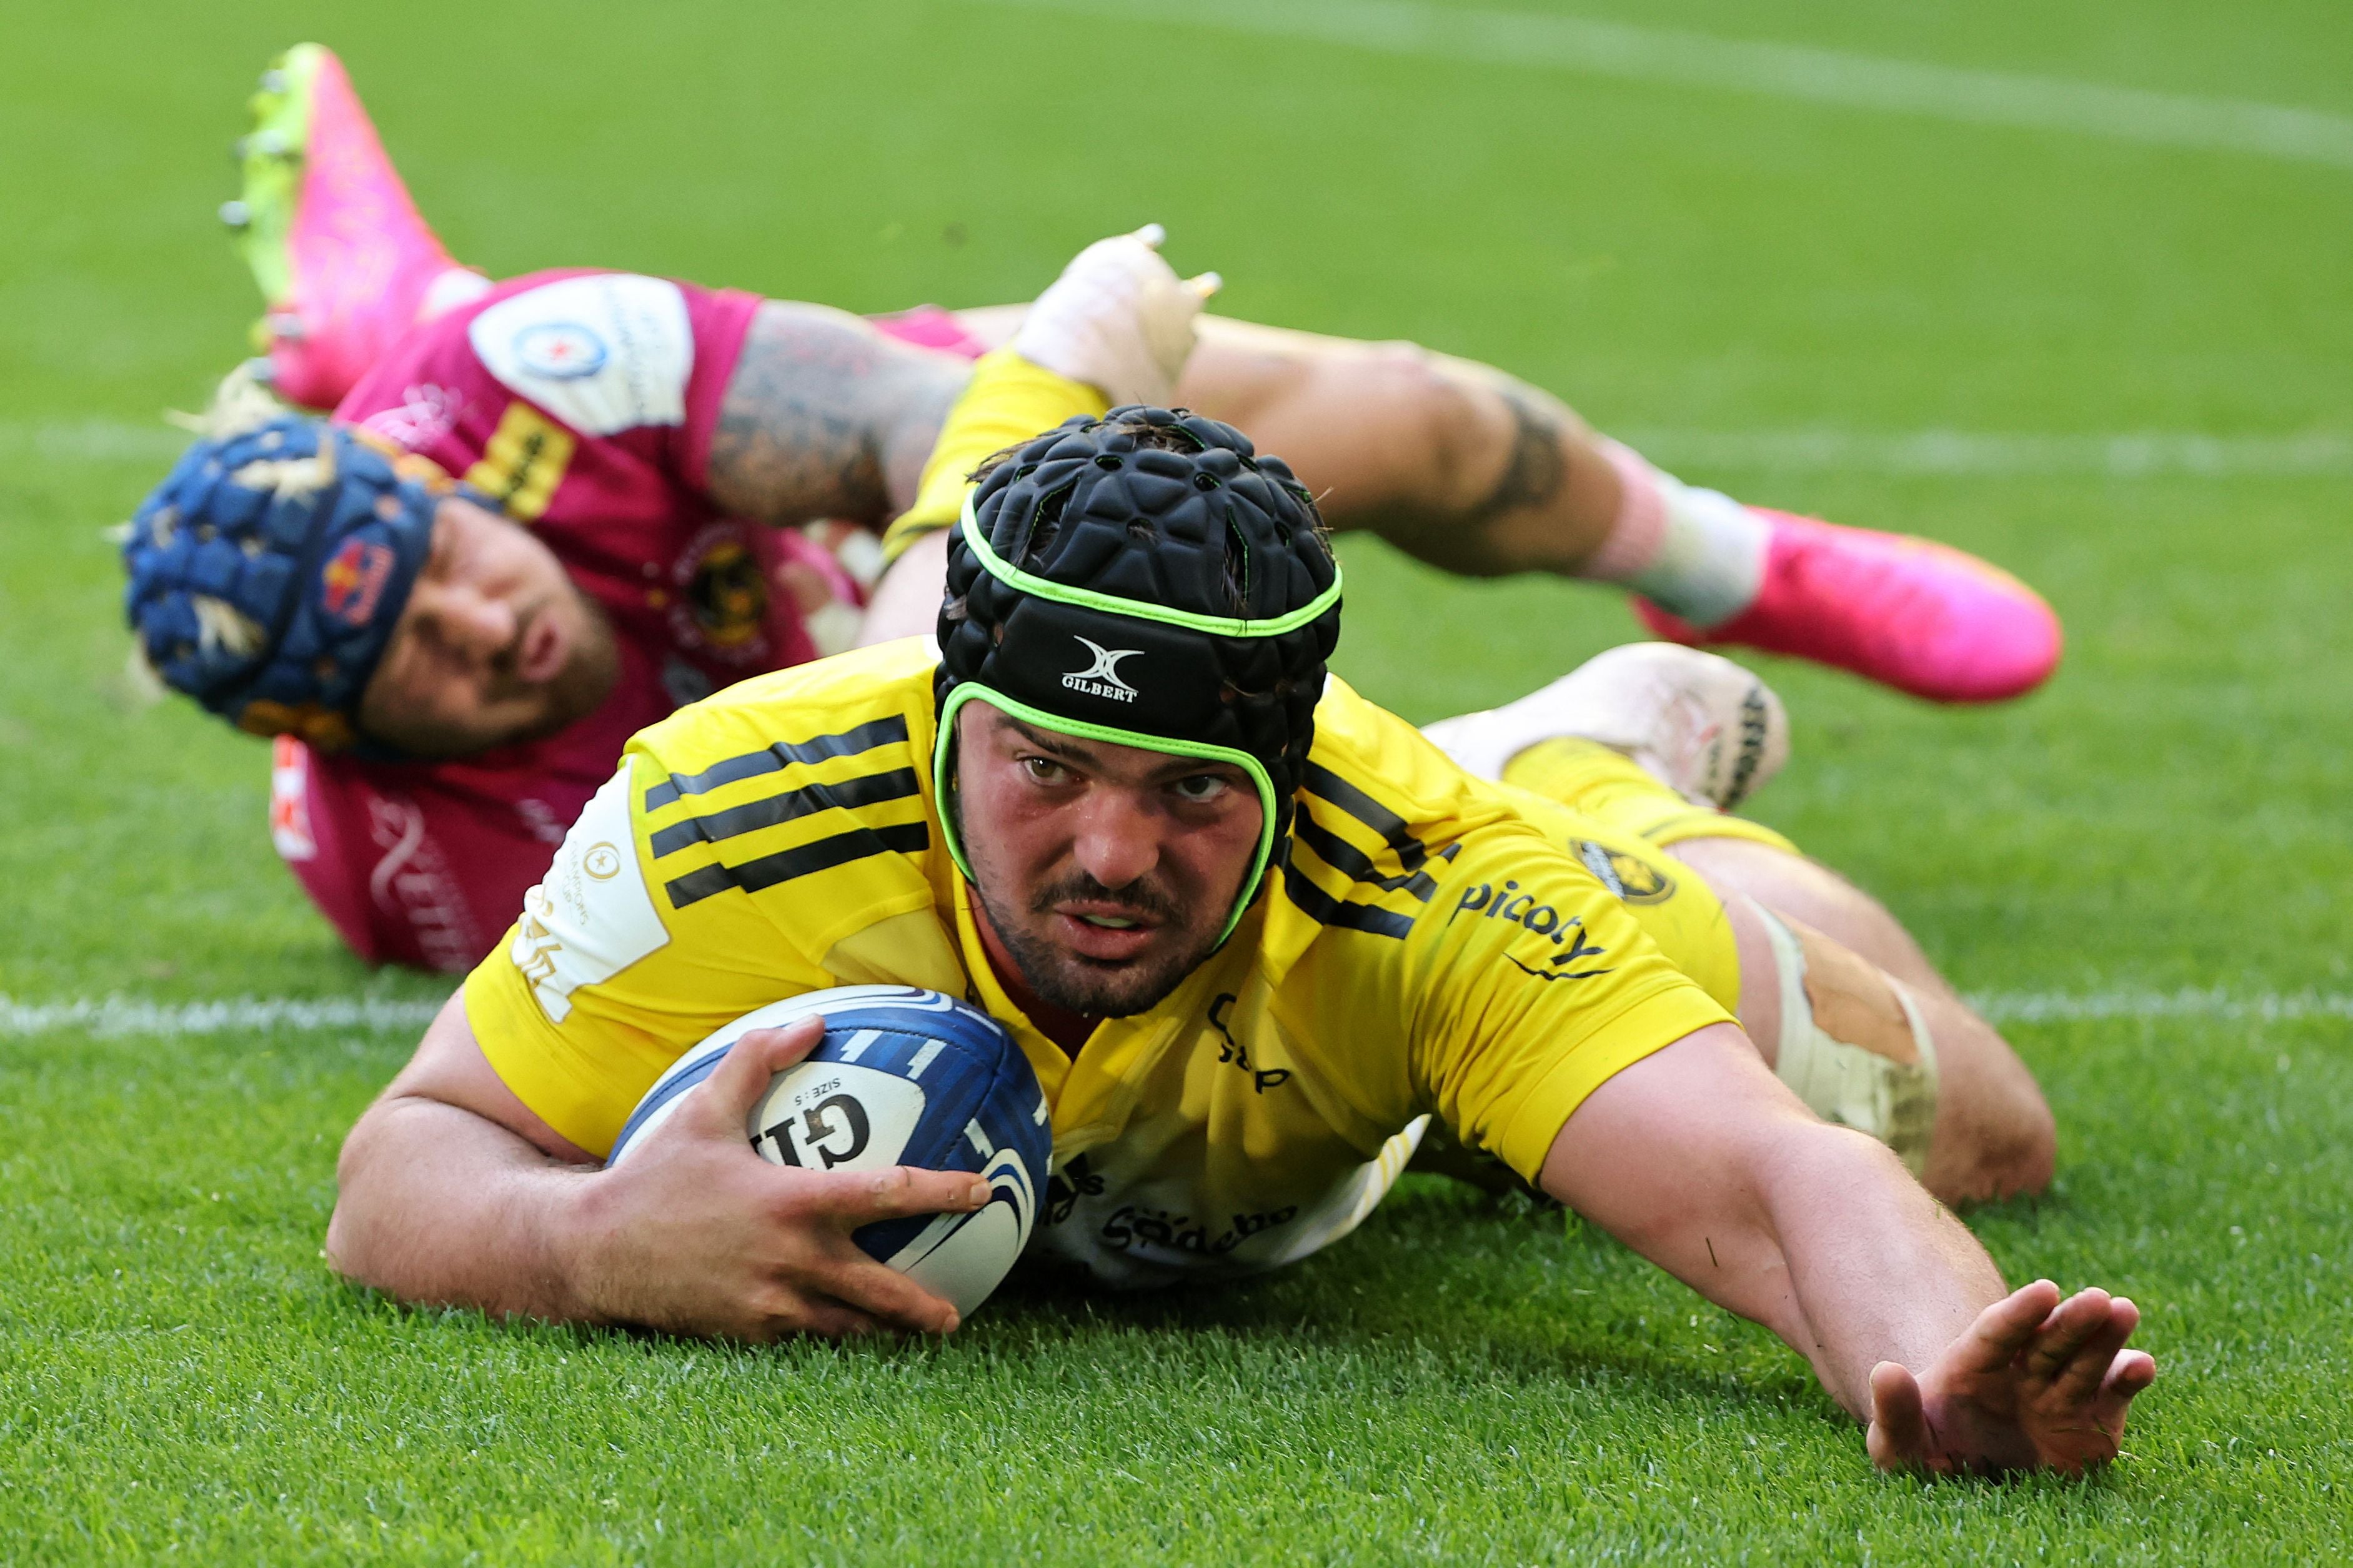 La Rochelle's French number 8 Gregory Alldritt dives across the line to score a try